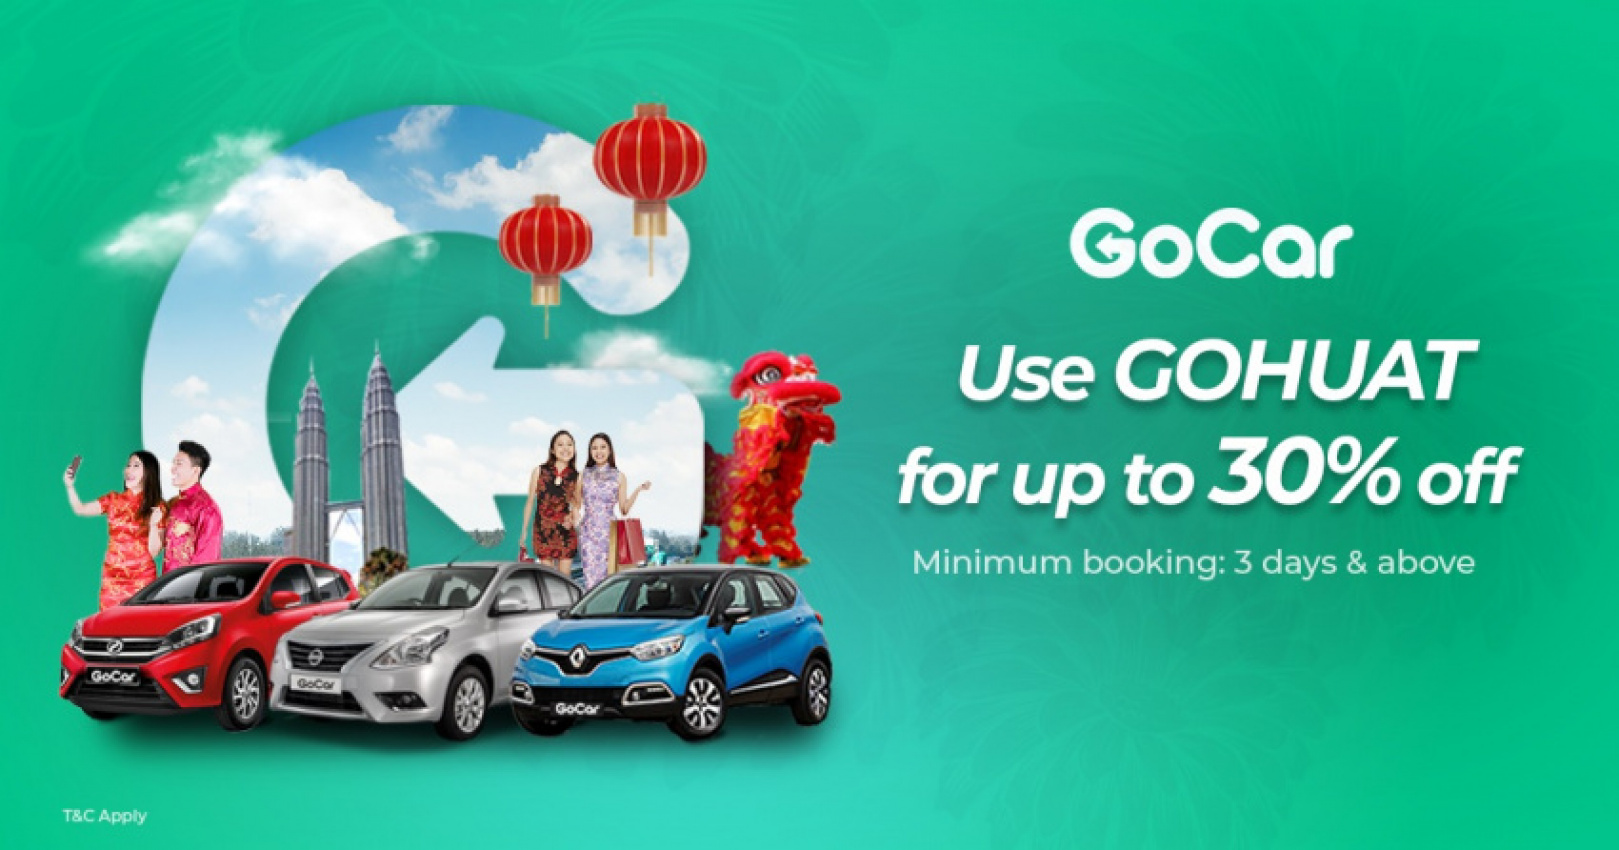 autos, cars, featured, car sharing, gocar, gocar malaysia, malaysia, promotions, gocar cny promo saves you 30% on round trip bookings